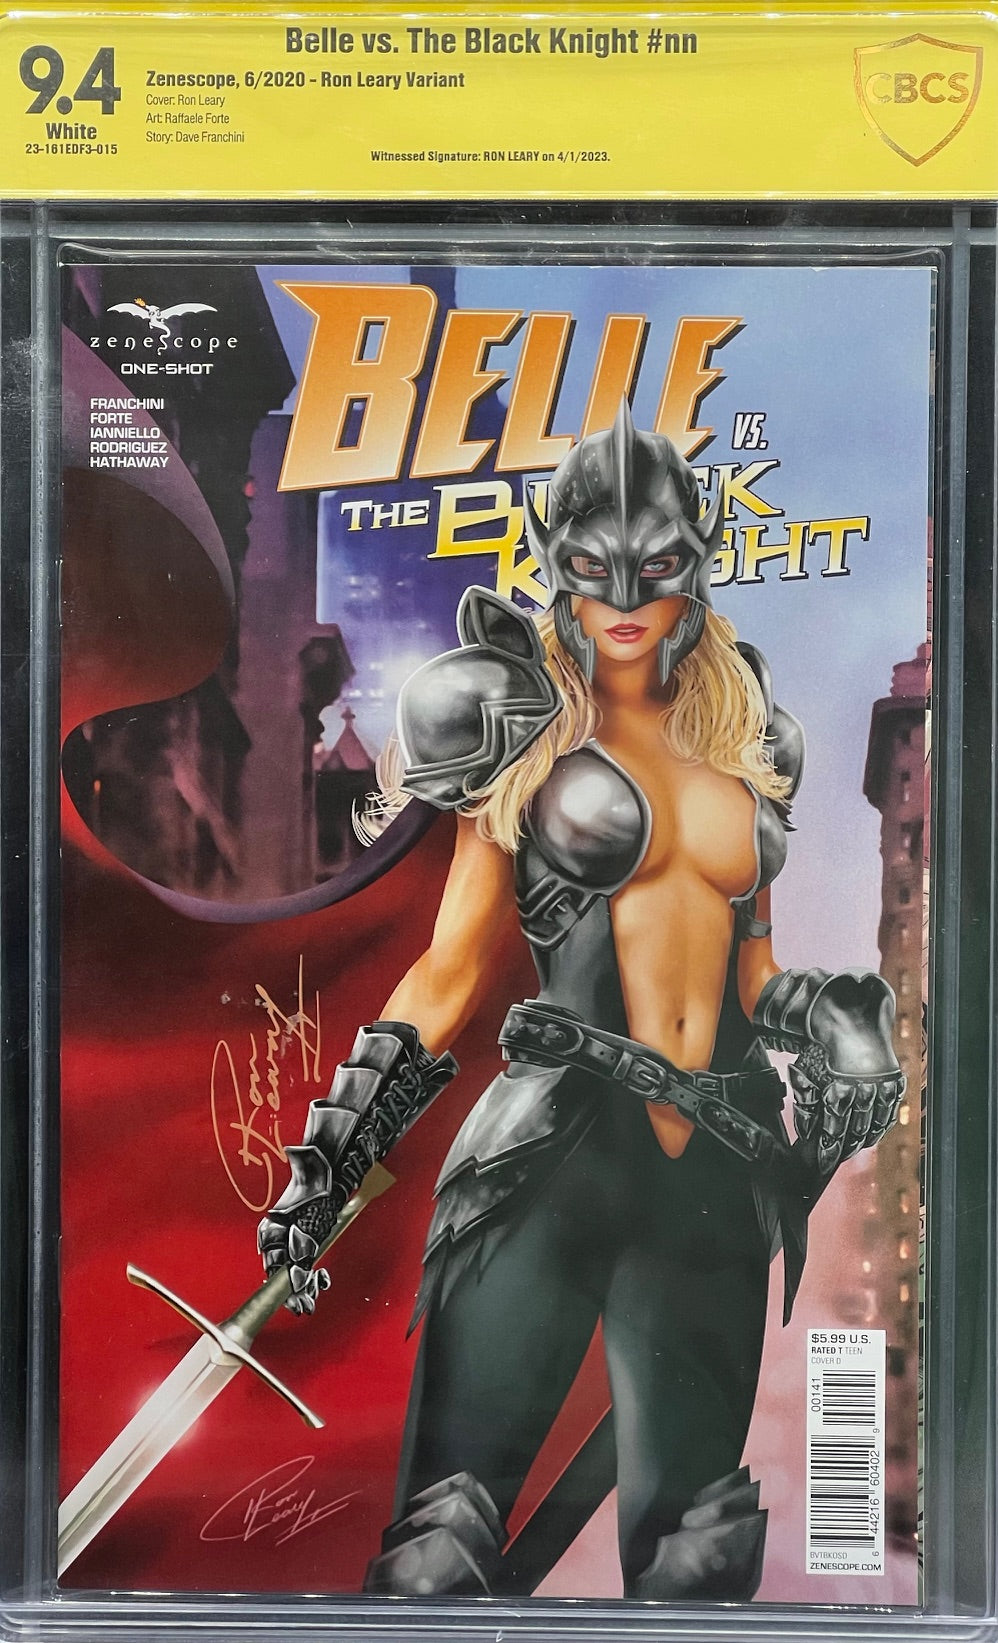 Belle vs. The Black Knight #nn Ron Leary Variant CBCS 9.4 Yellow Label